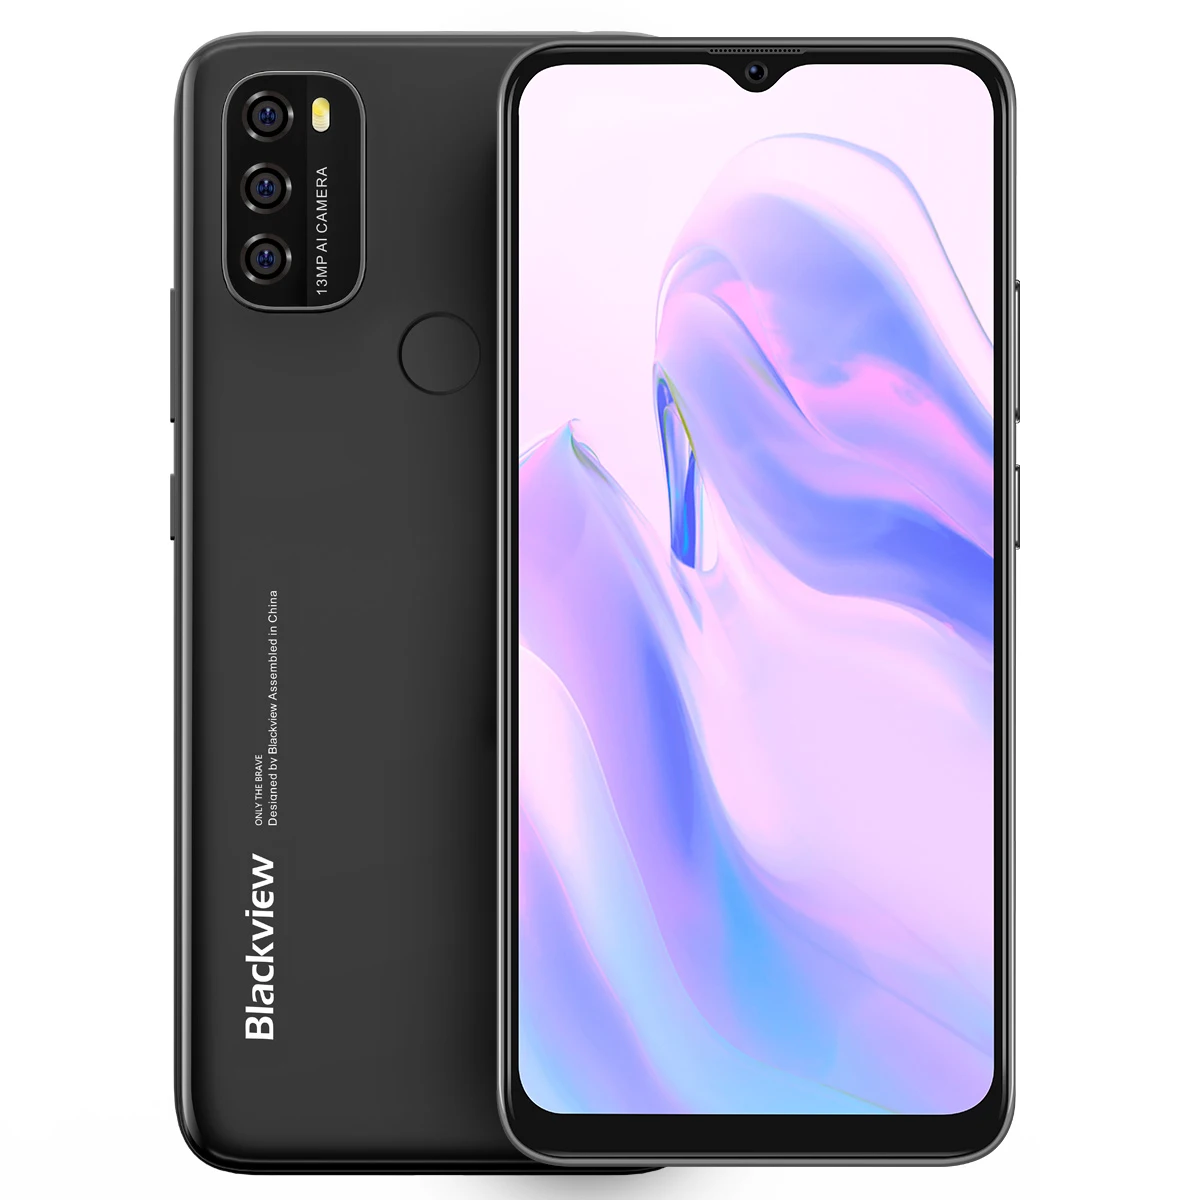 samsung android cell phones Blackview A70 Android 11 Smartphone 5380mAh Big Battery Octa Core 3GB RAM+32GB ROM 6.517'' Display 13MP + 5MP Dual SIM Face ID best android cellphones